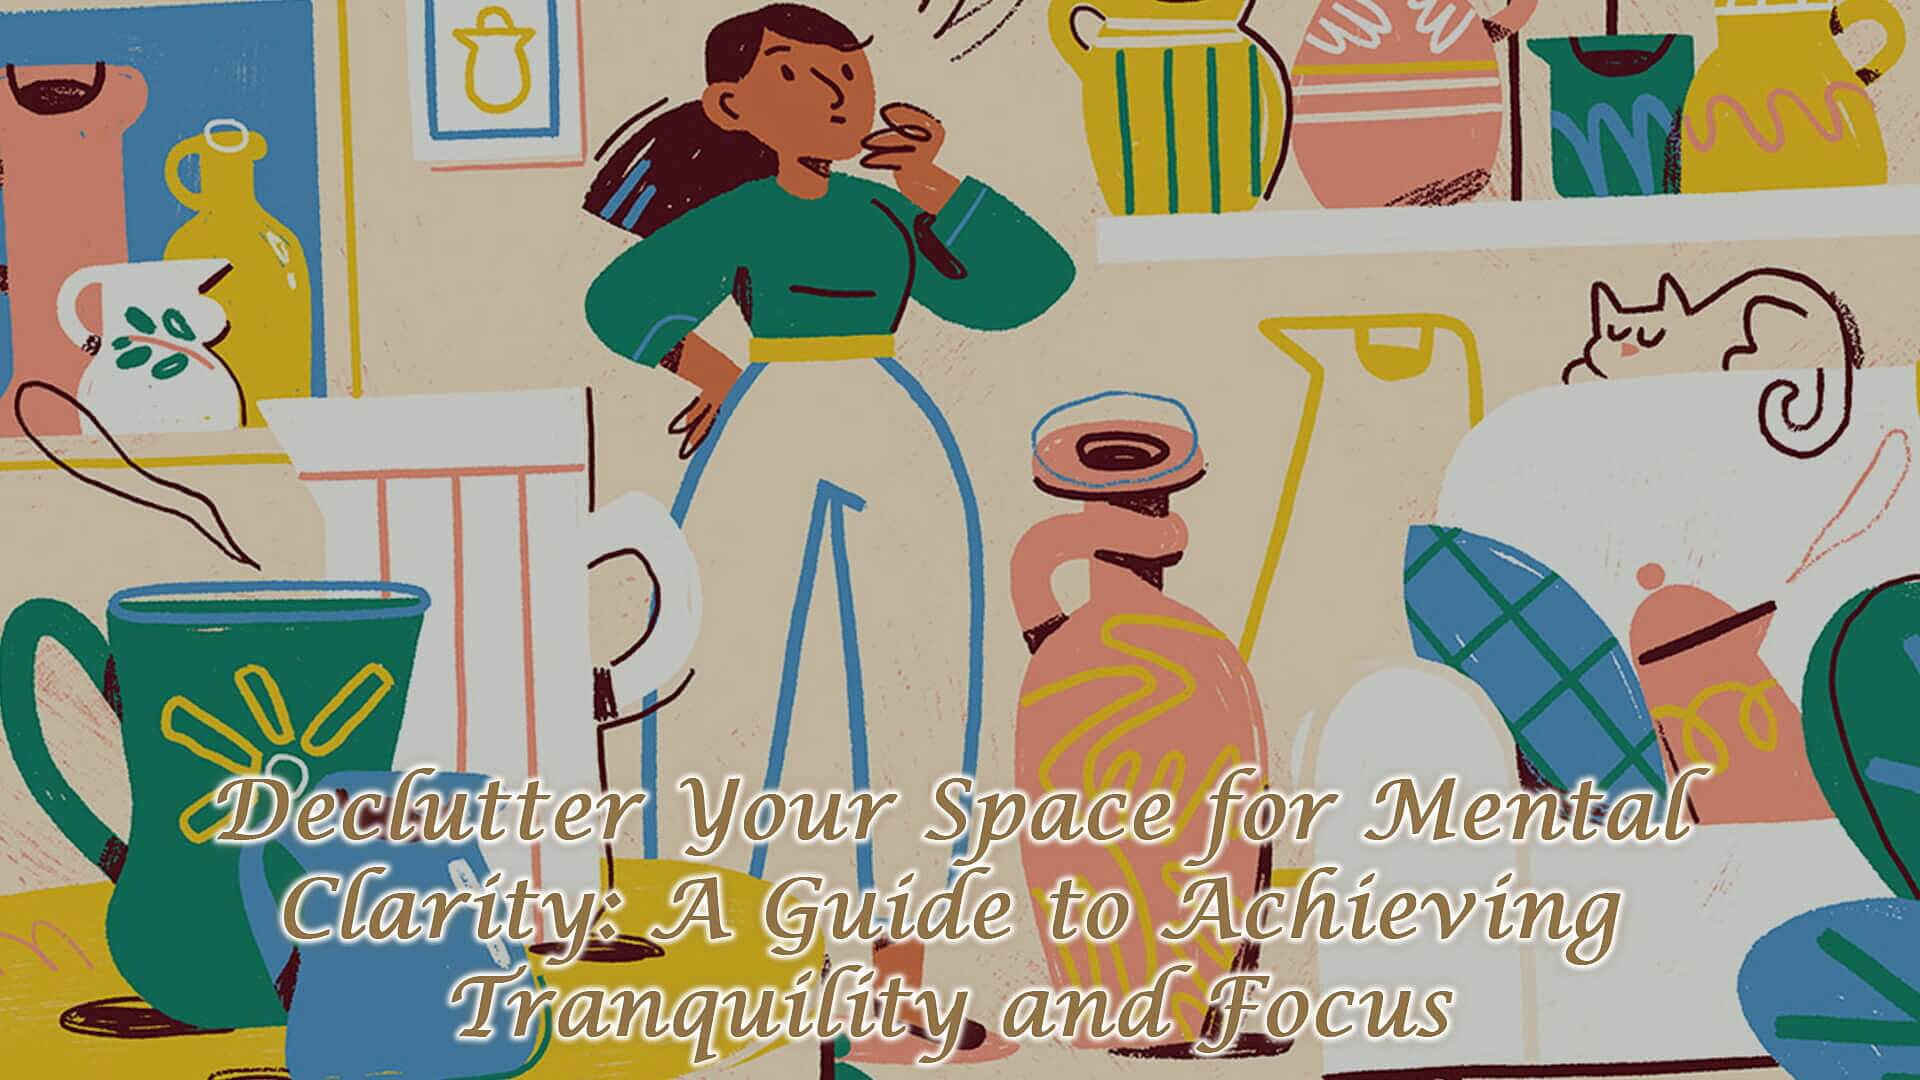 Declutter Your Space for Mental Clarity: A Guide to Achieving Tranquility and Focus